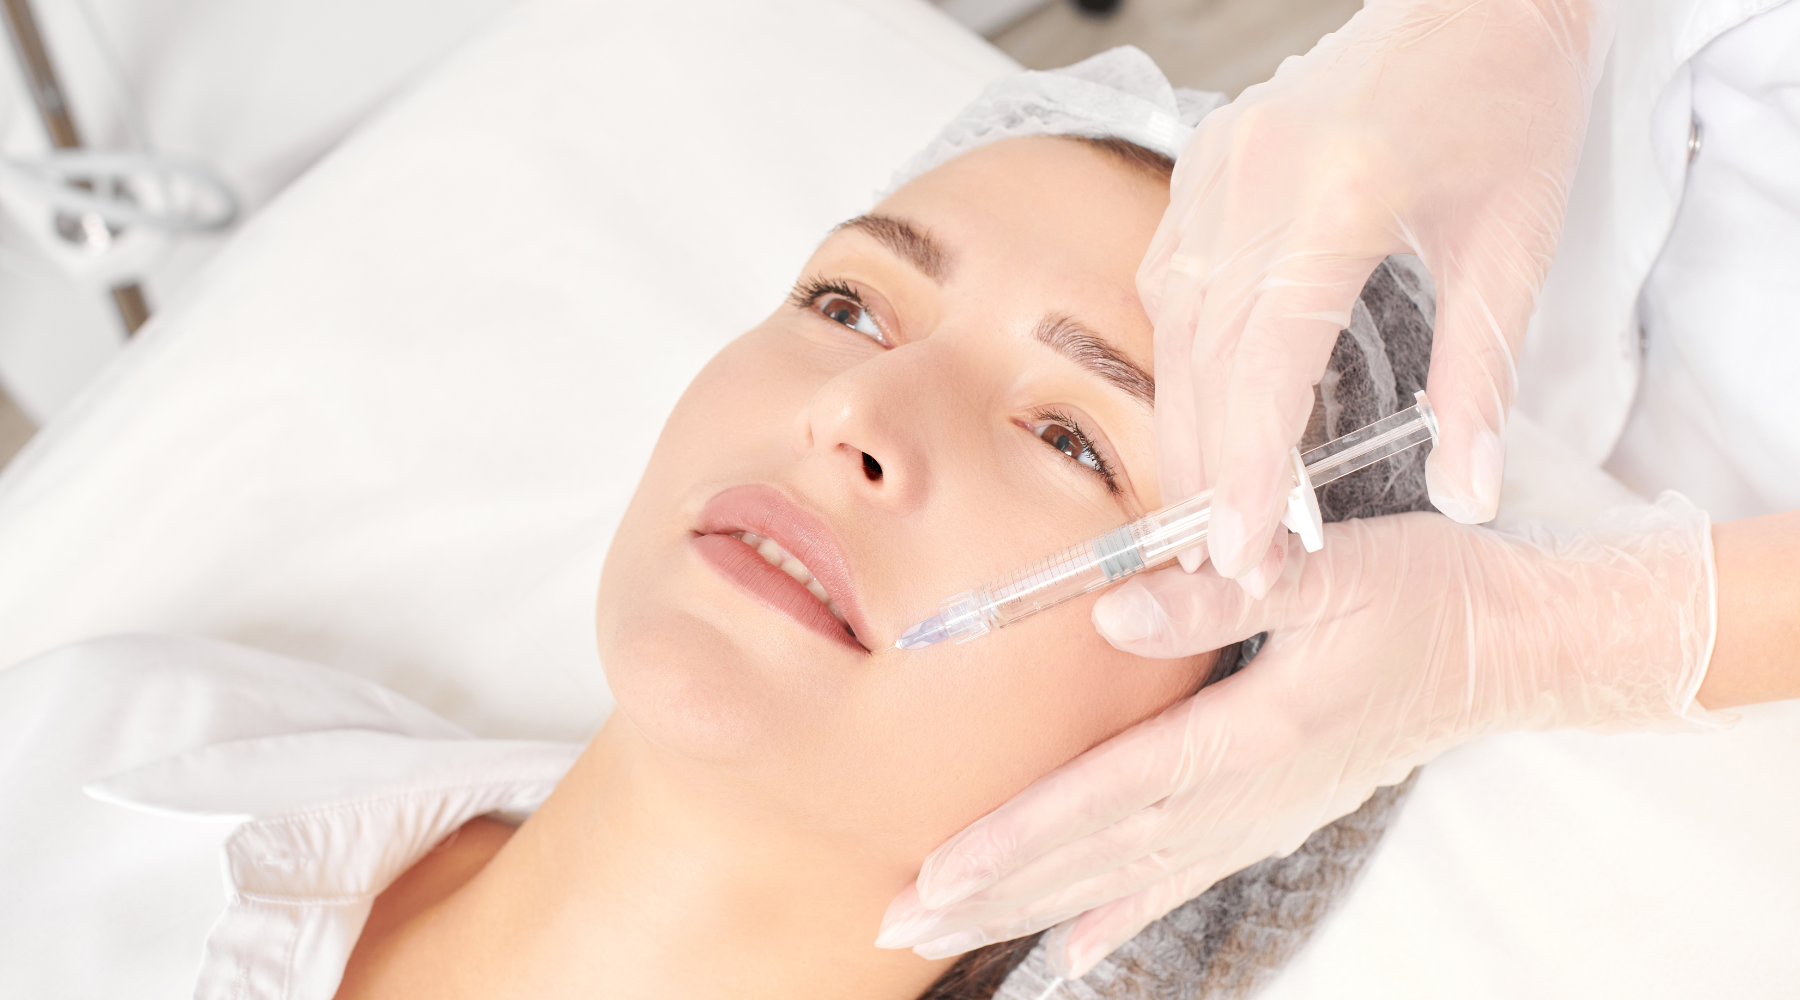 The most popular cosmetic procedures performed by dermatologists: which ones are worth the investment?